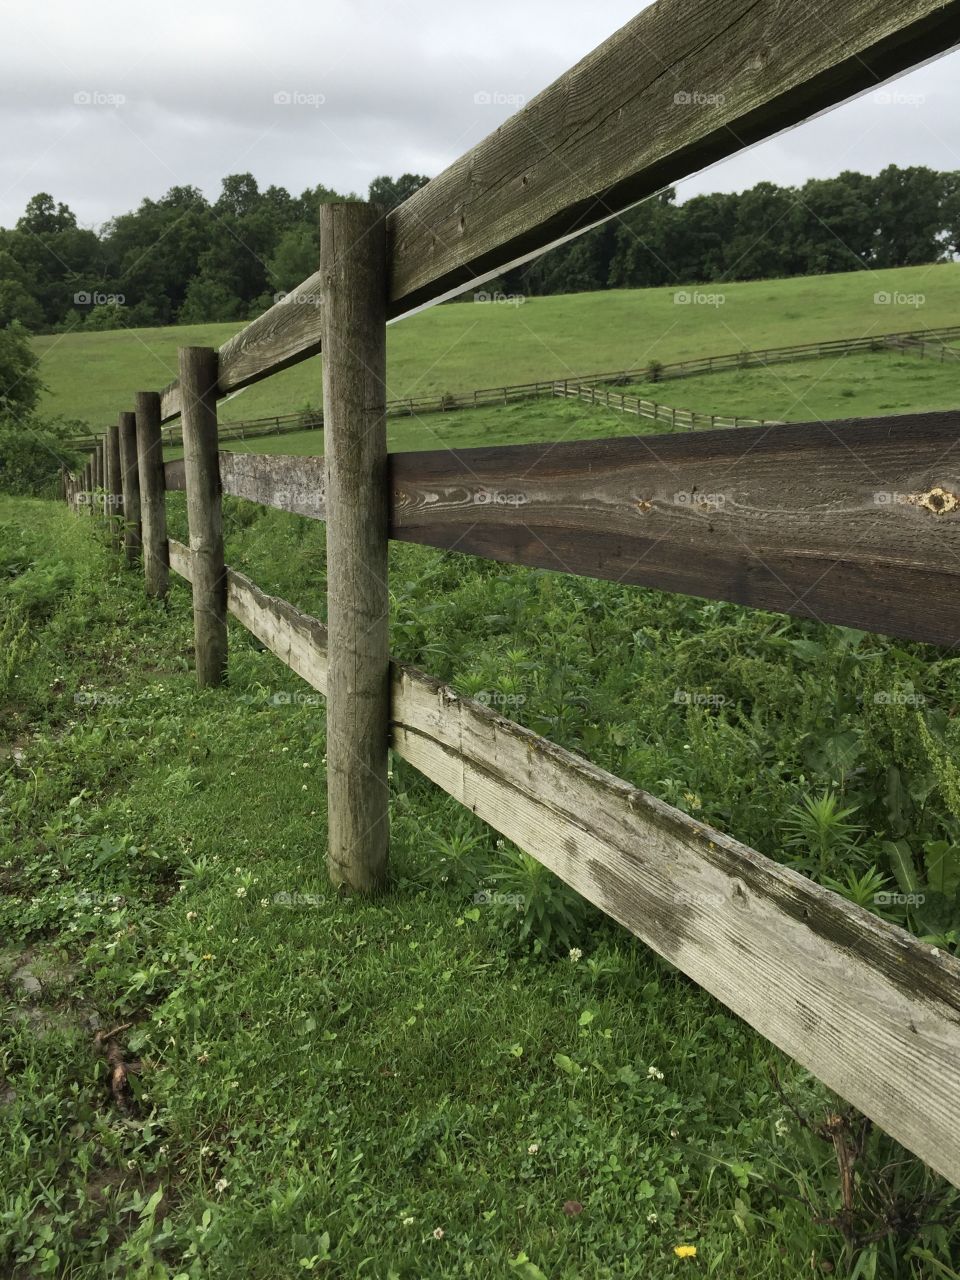 Perspective image of a rustic wooden fence dividing up several pastures